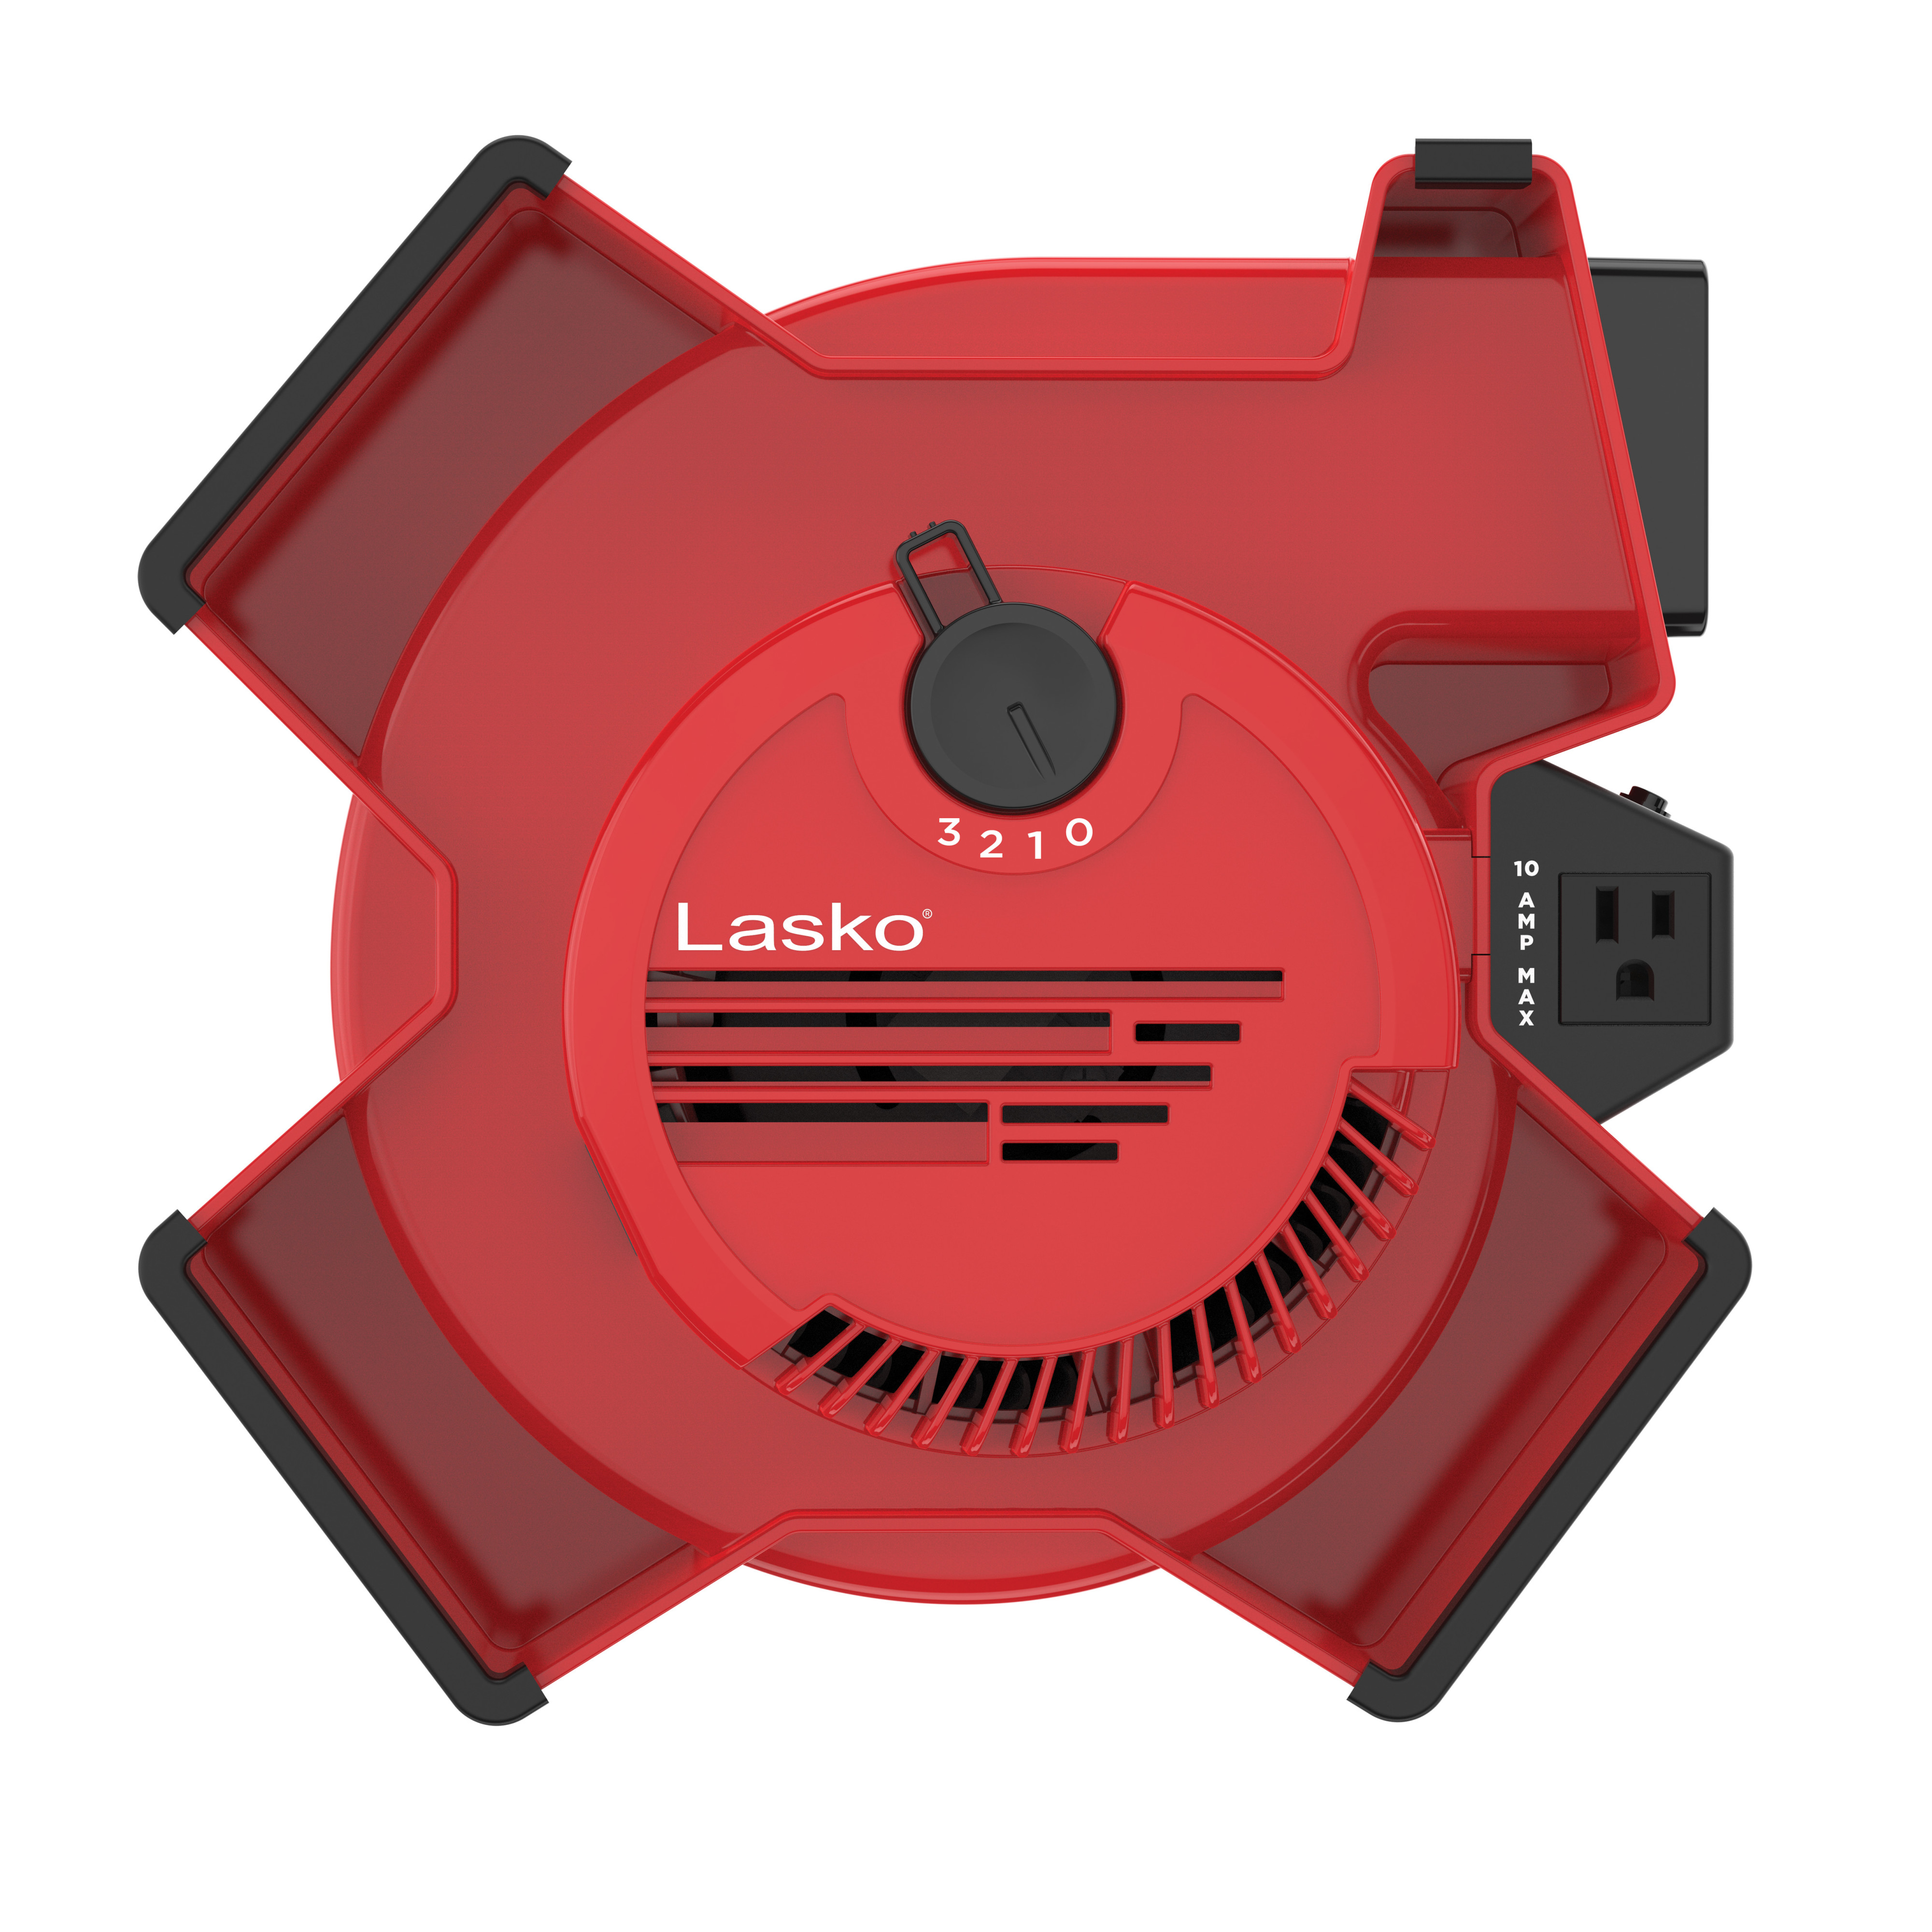 Lasko 11" X-Blower Multi-Position Utility Blower Fan with USB Port, Red, X12900, New - image 5 of 5